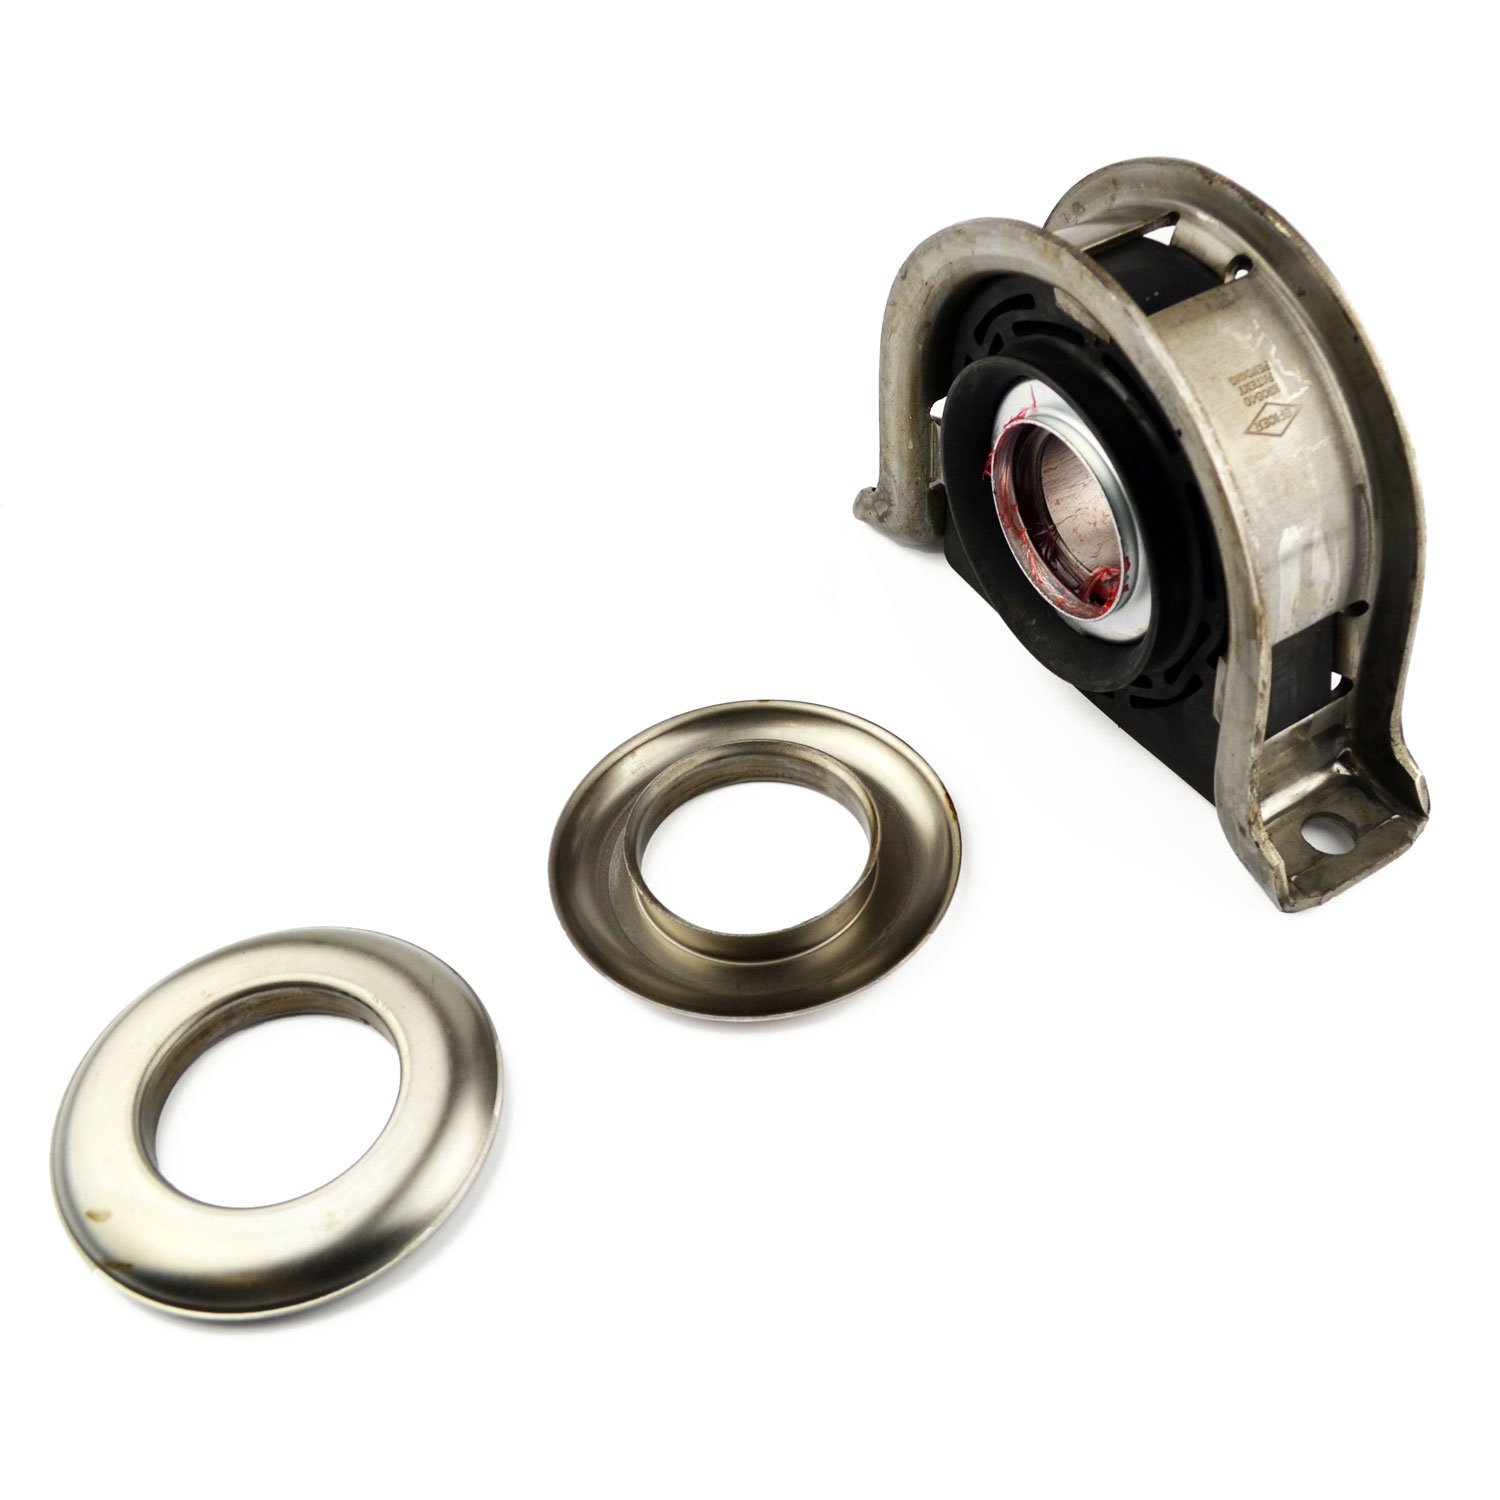 Center Support Bearing ID (A) = 1.574